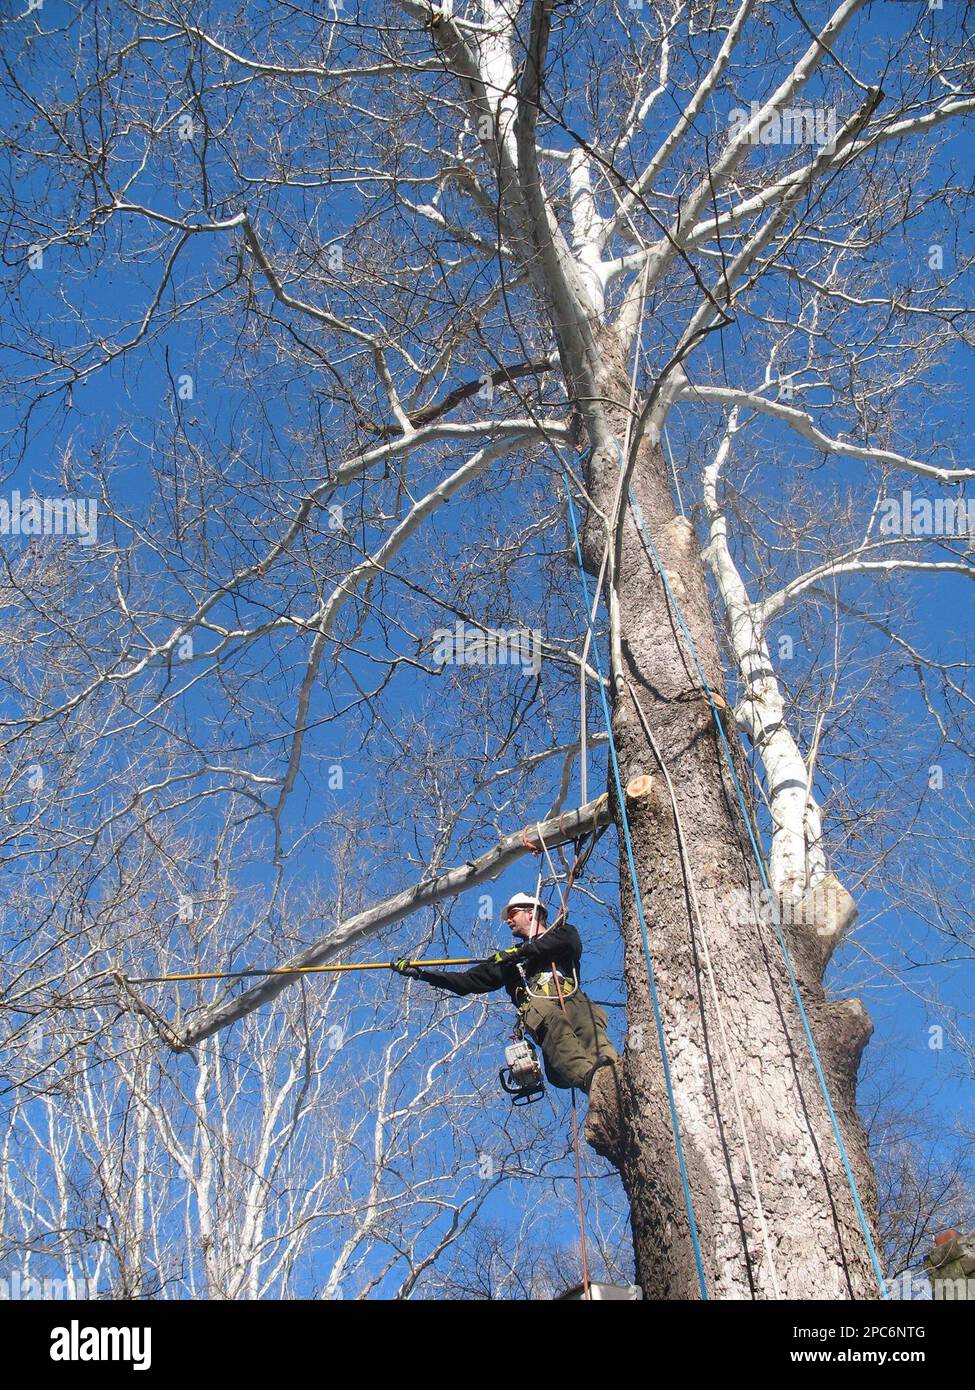 arbor experts john hawkins attached to a system of ropes while trimming branches high up in an american sycamore tree friday dec 15 2006 in story ind on friday arborists hired by story inn owner rick hofstetter climbed about 30 feet up into the 110 foot tall tree using chain saws to cut away limbs that were improperly cut years ago their work eliminated weak spots that could have invited disease rings from a core sample indicate the tree growing in the middle of the inns courtyard is more than 160 years old ap photoherald times laura lane 2PC6NTG